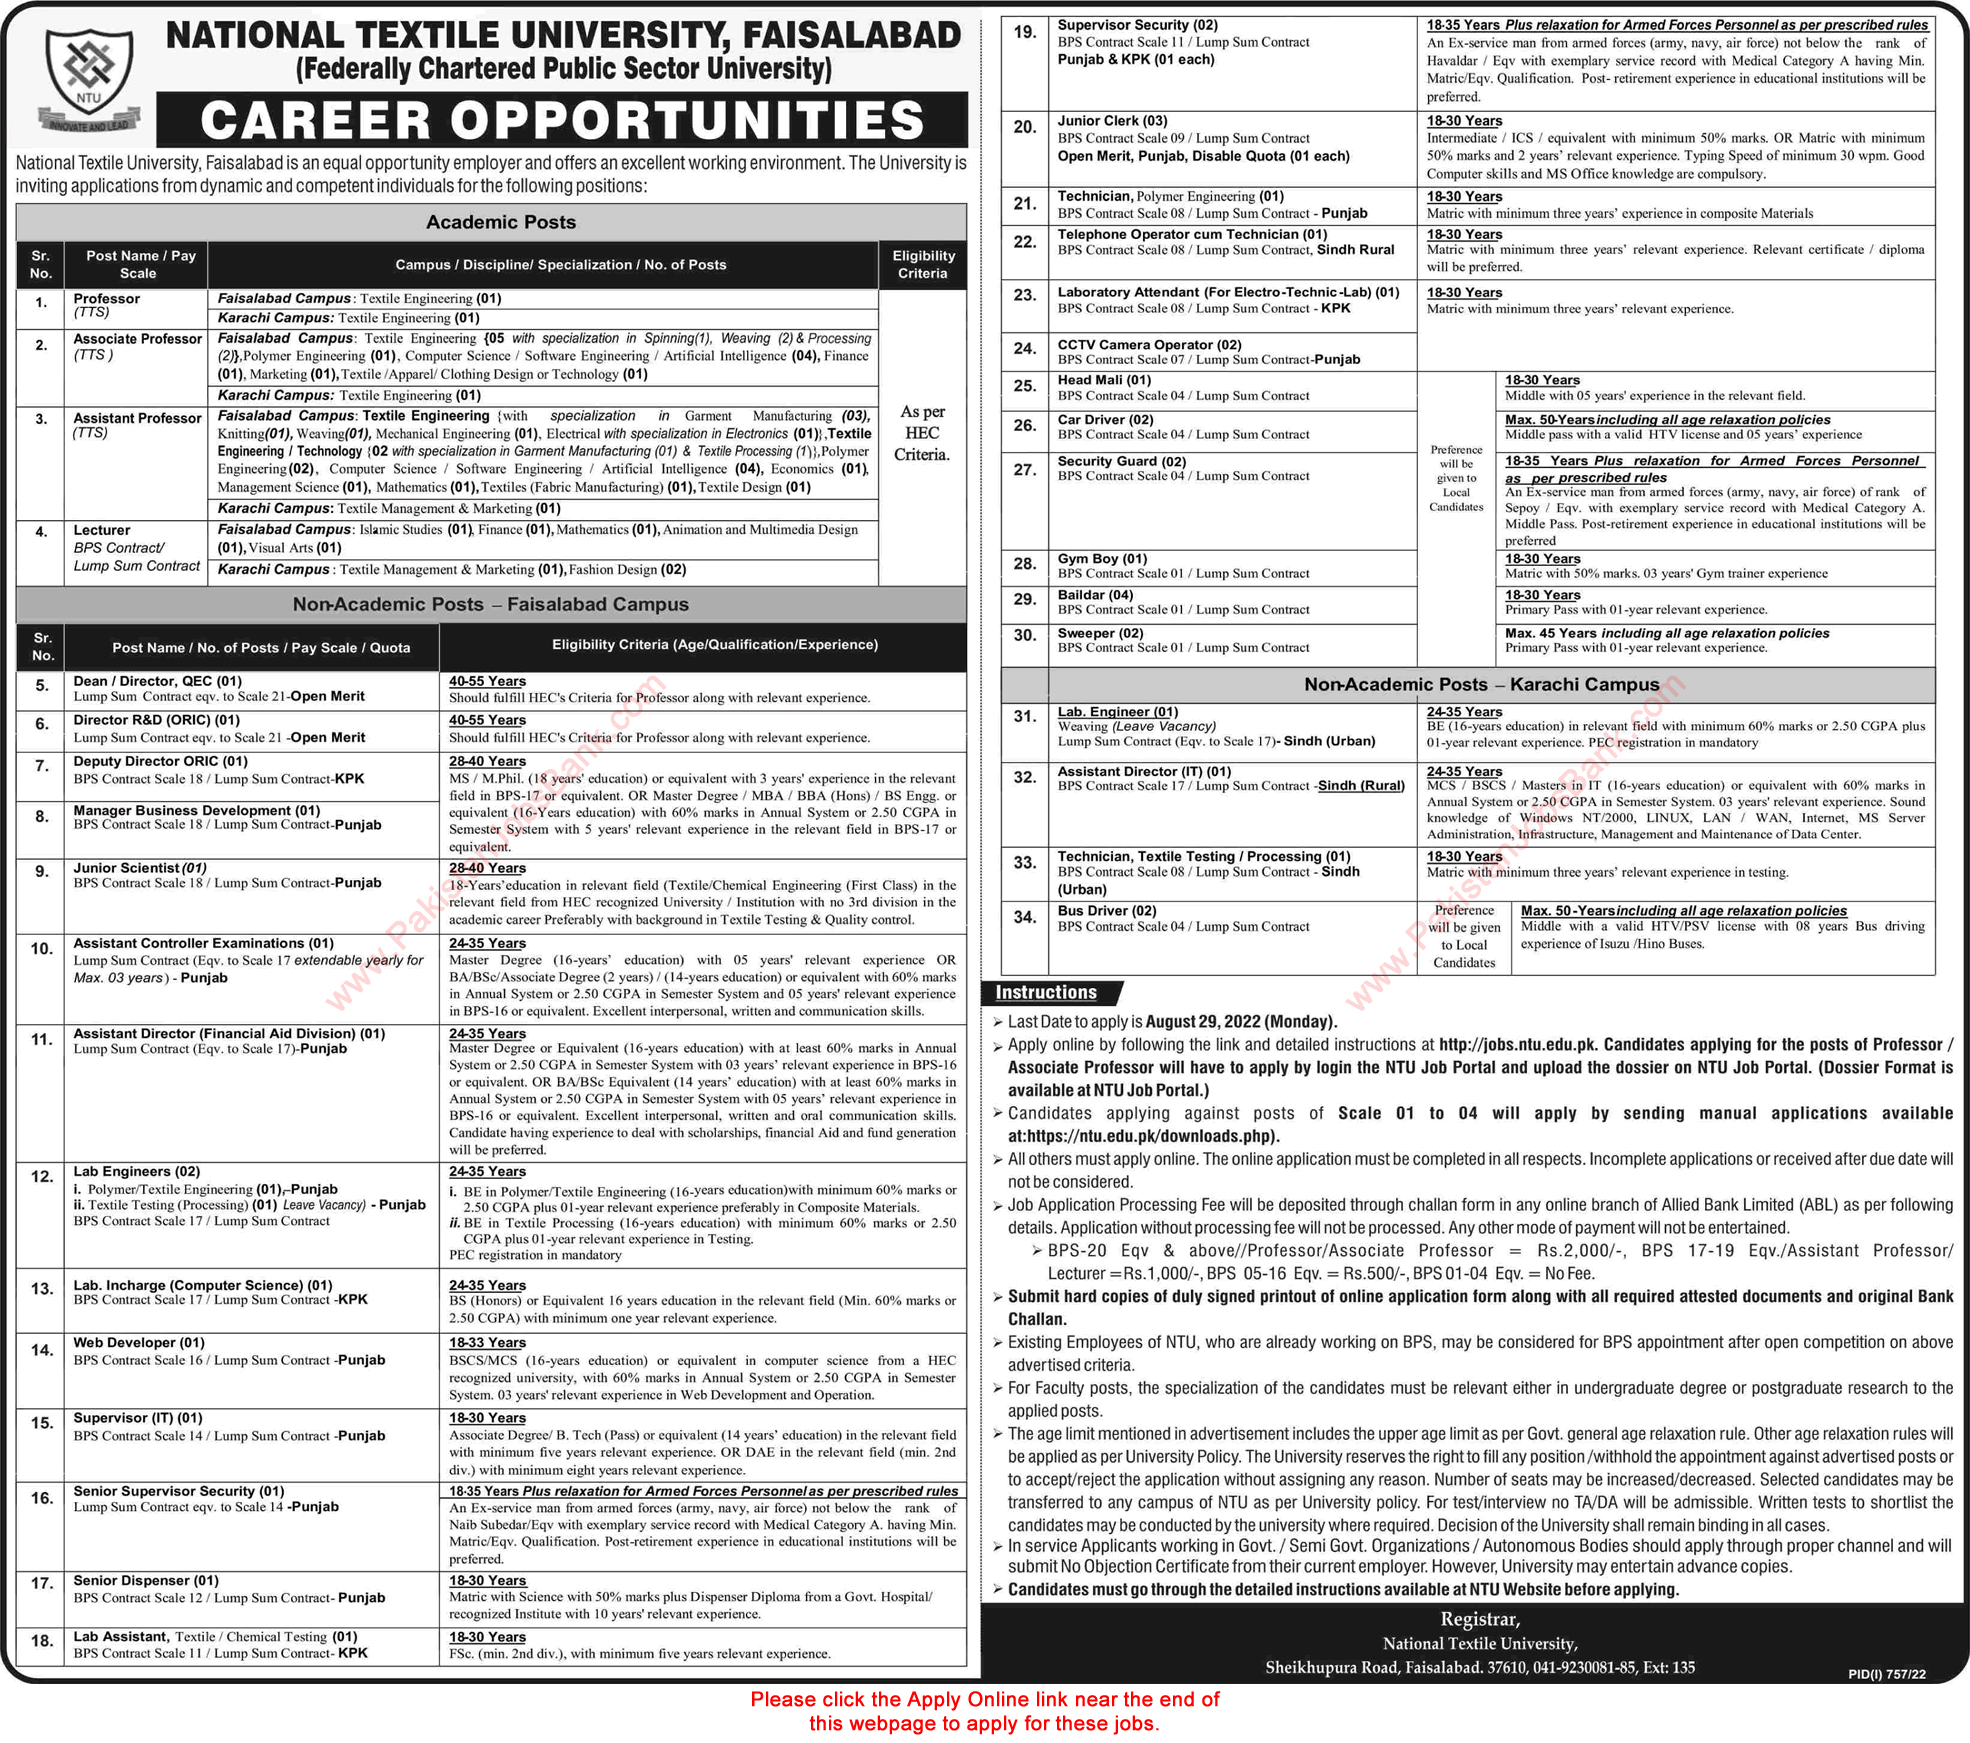 National Textile University Faisalabad Jobs 2022 August NTU Apply Online Teaching Faculty & Others Latest